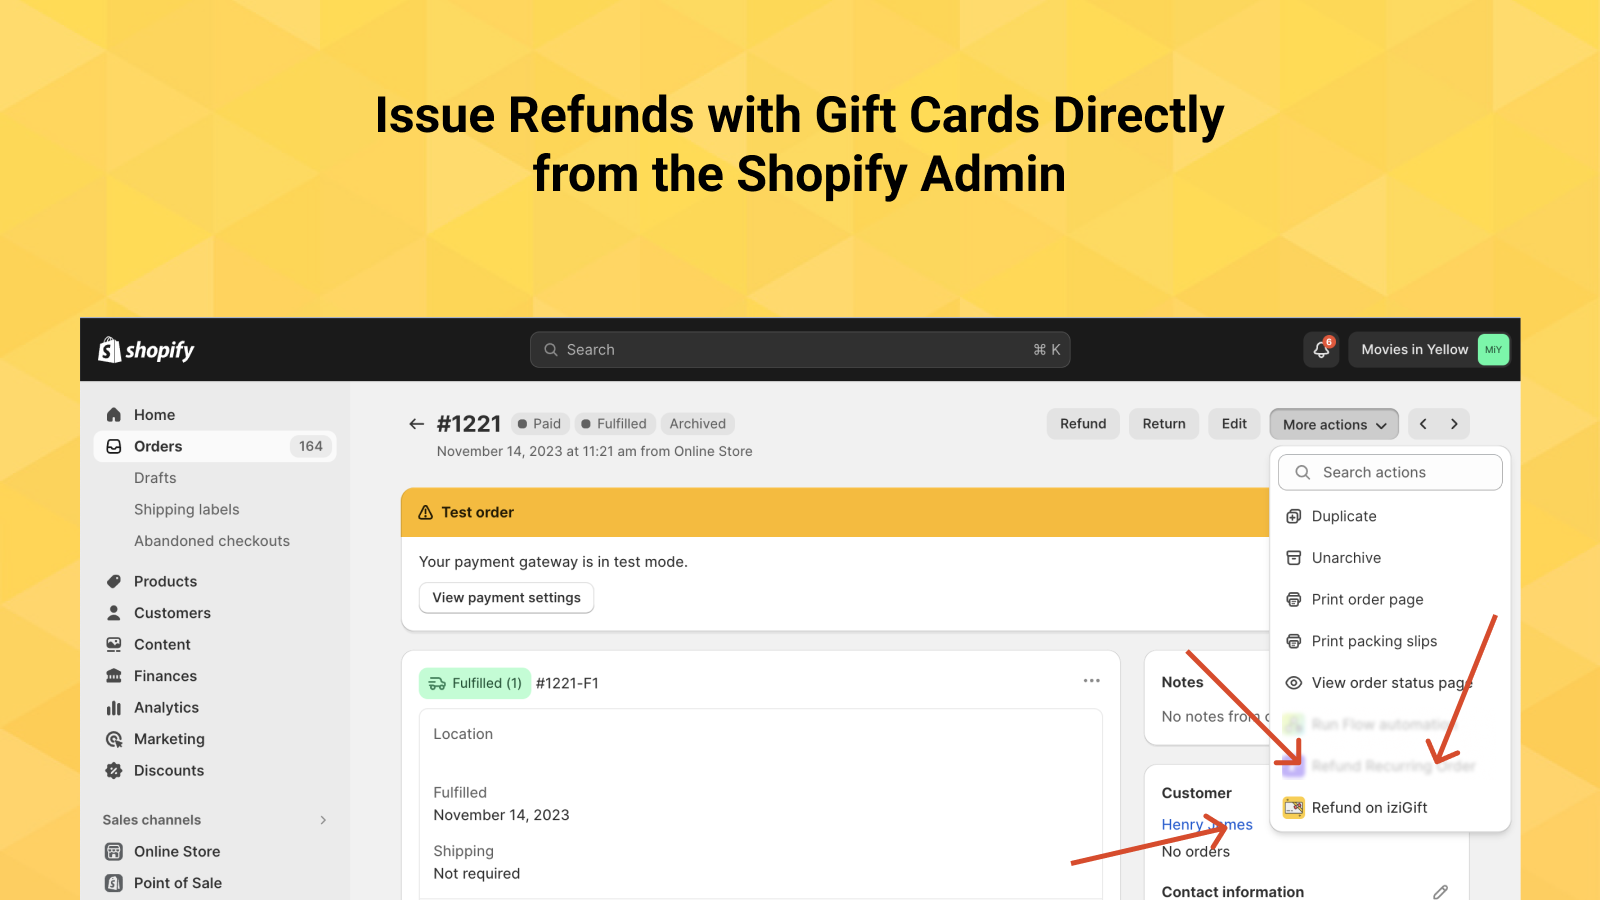 Streamline operations & refund with gift cards in Shopify admin